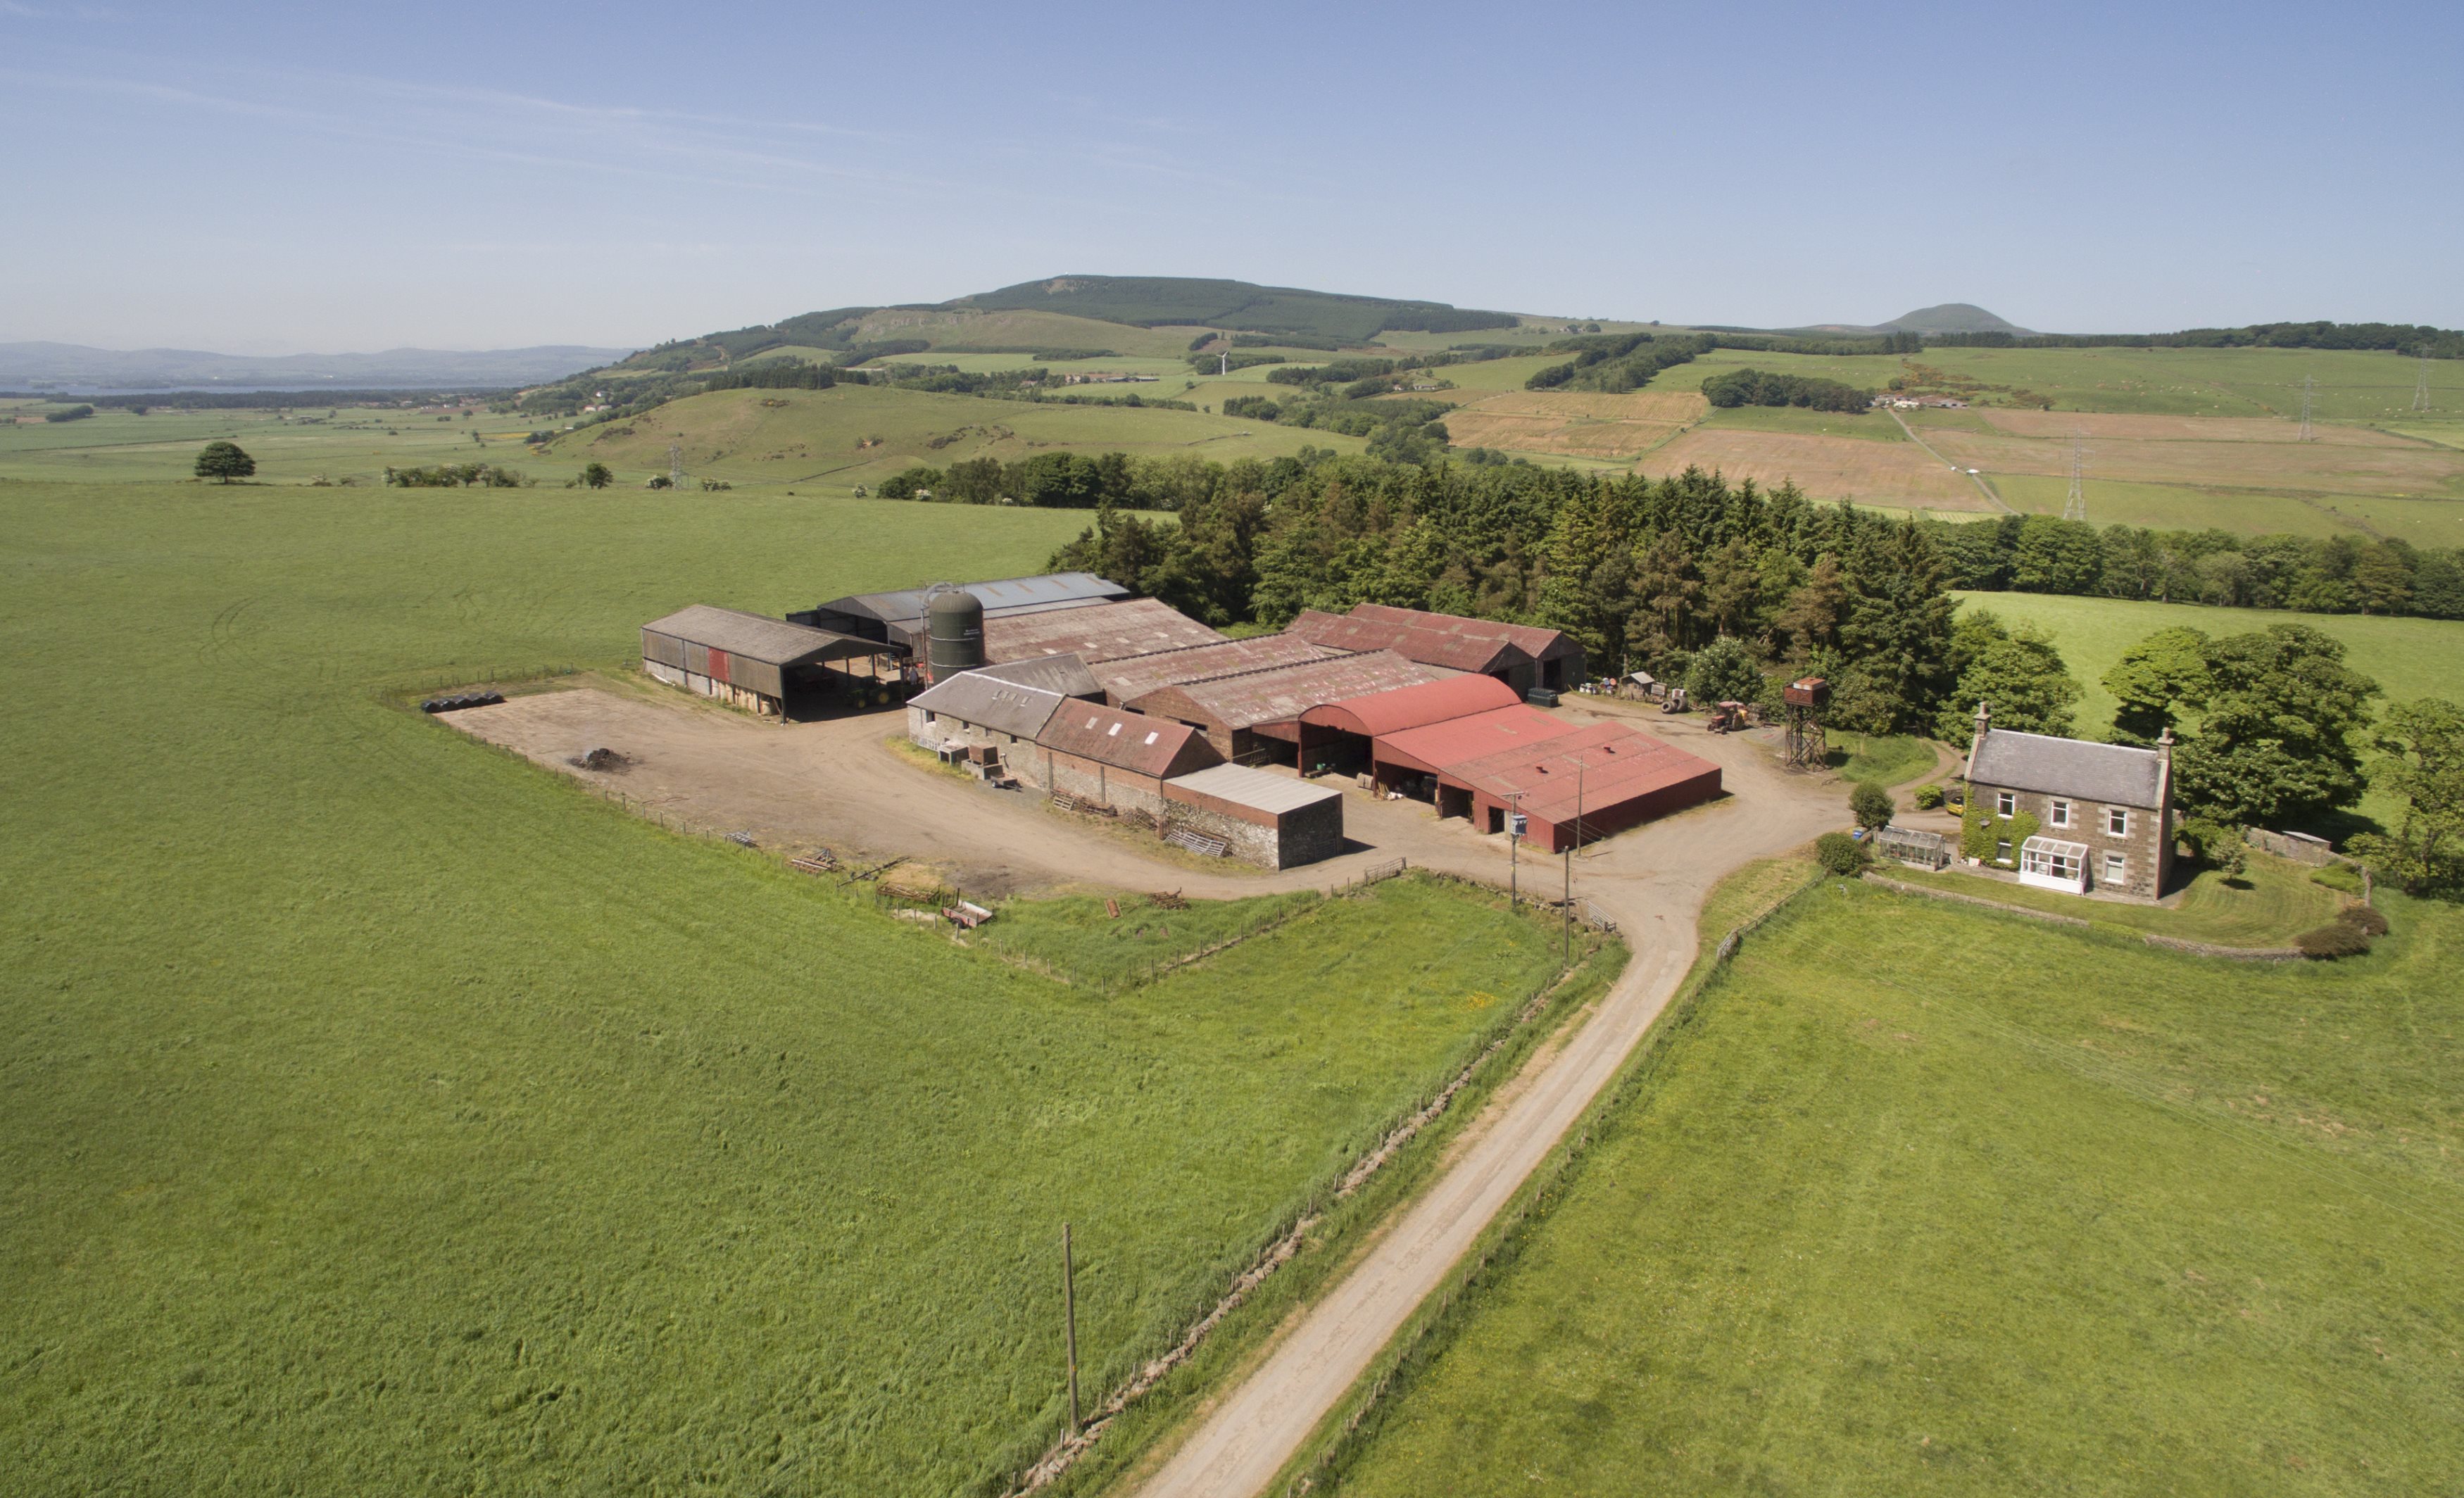 The farming system at Auchmuir is a mix of arable and livestock.